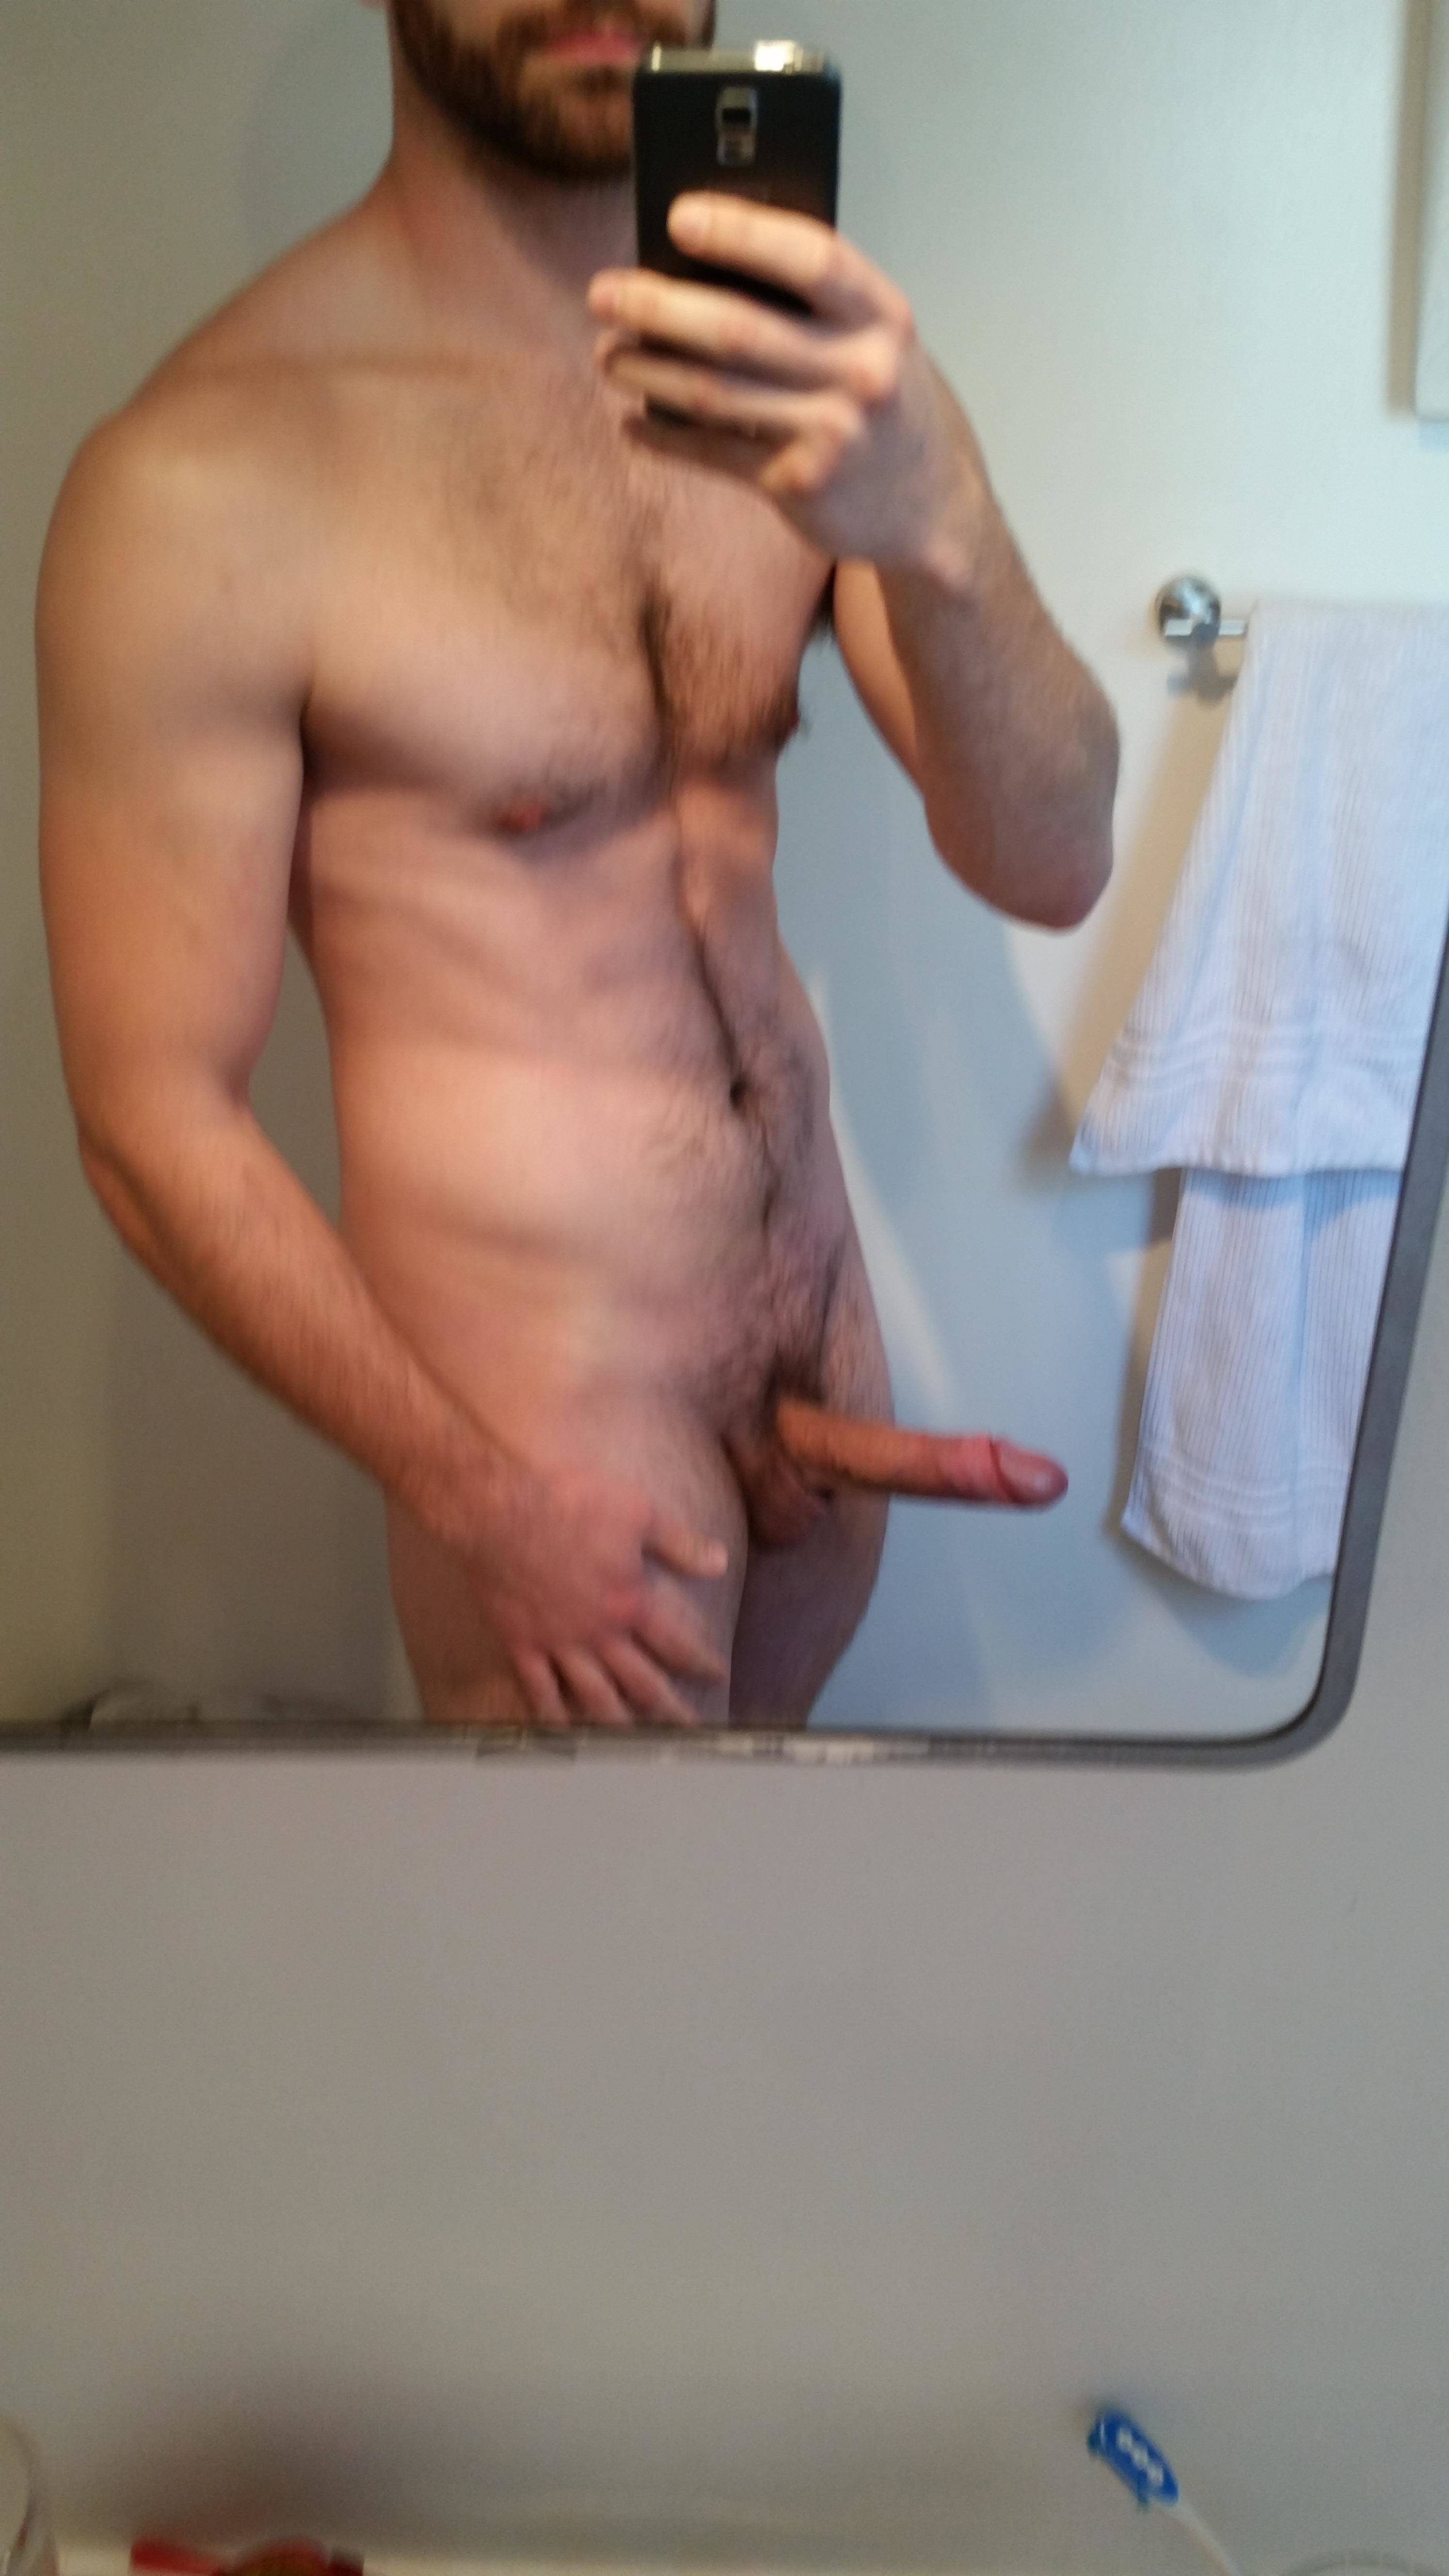 Fuck Yeah Bearded Dude With A Mighty Fine Dick… His